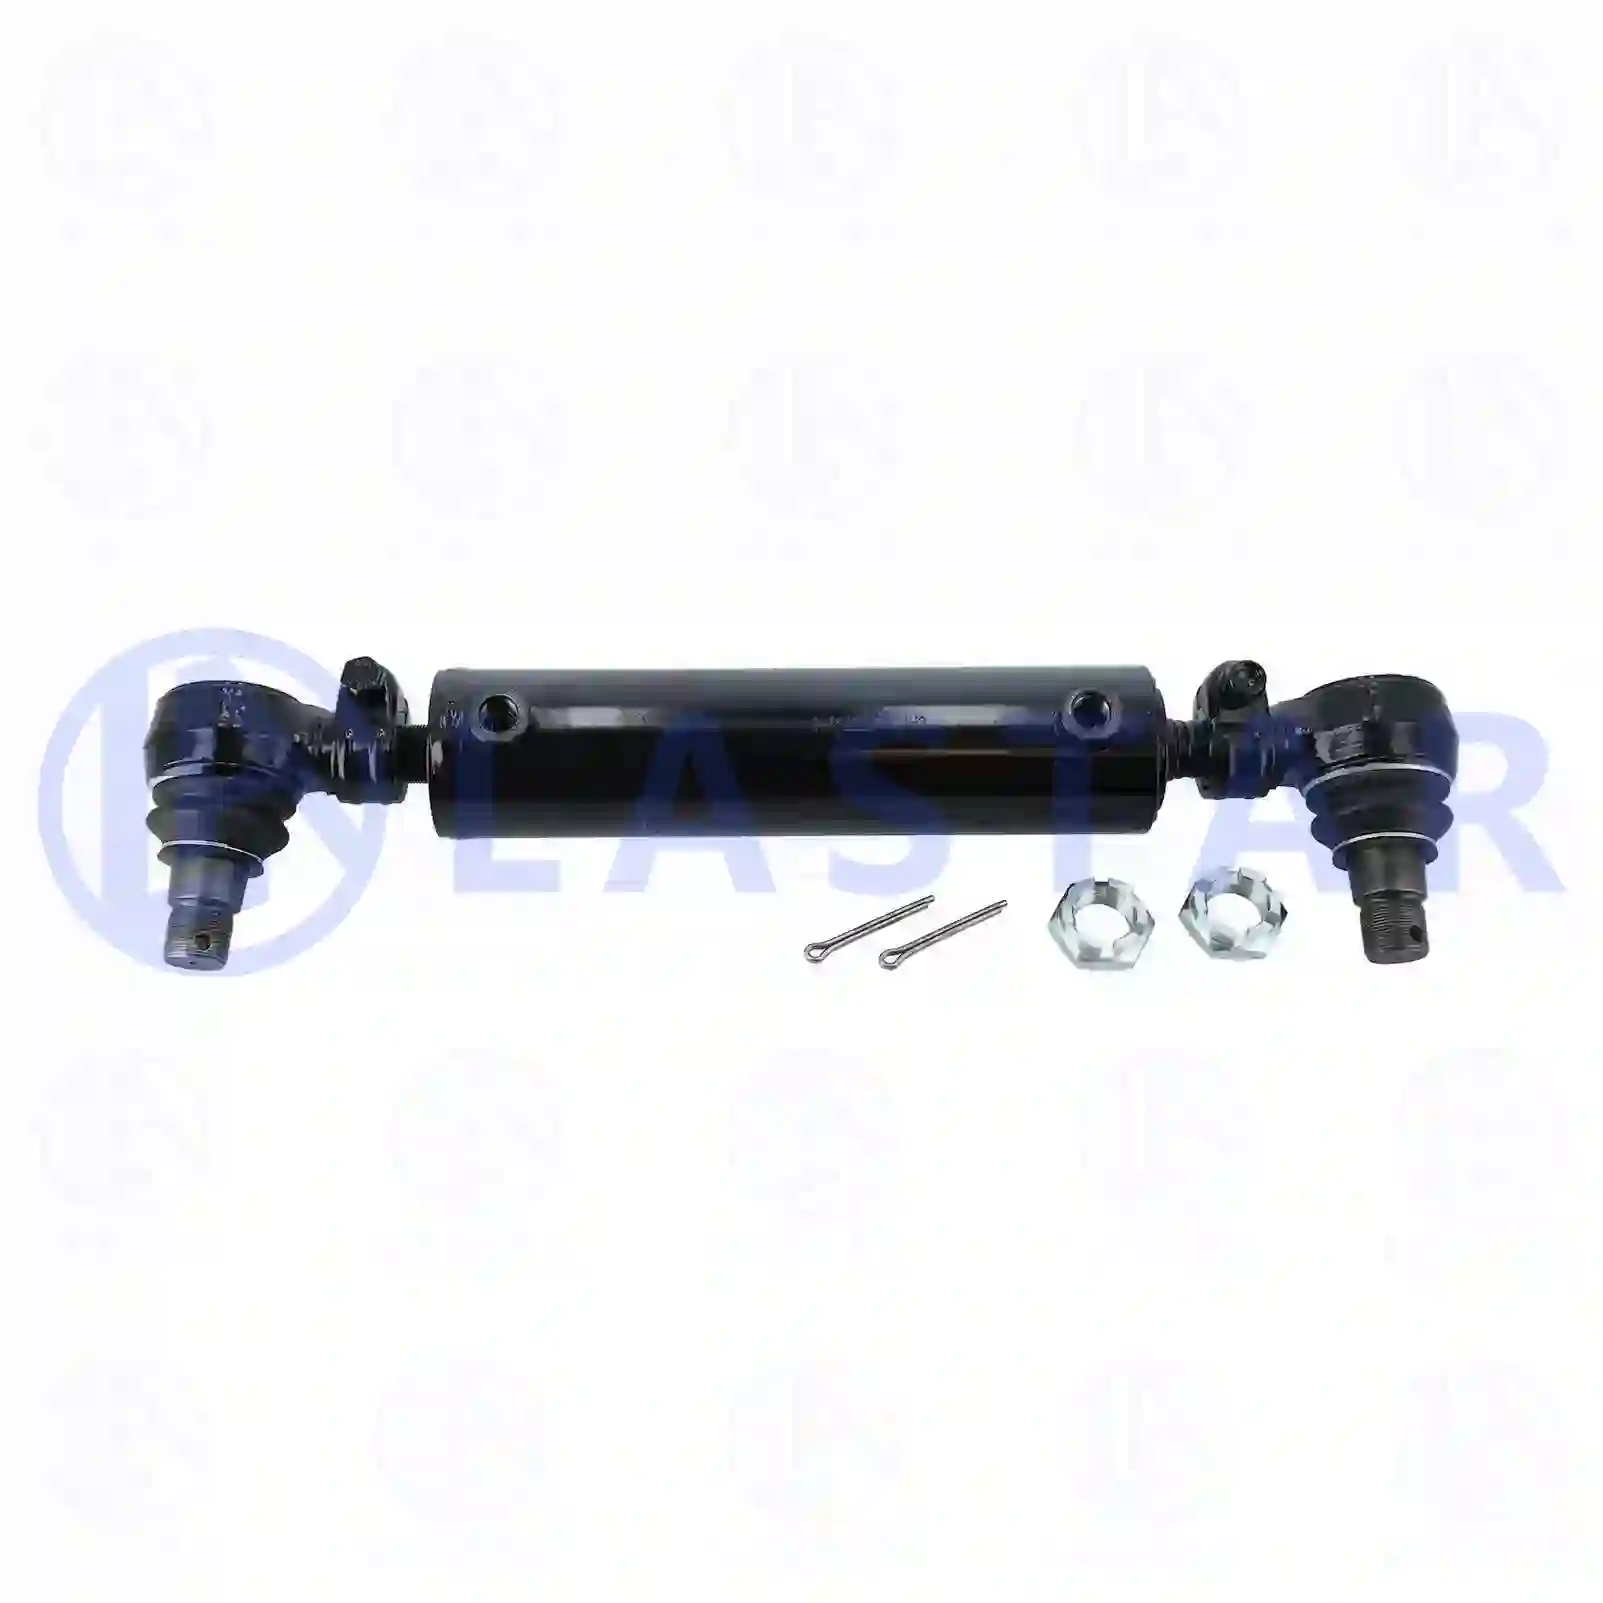 Steering cylinder, 77705313, 41214925, , , , , ||  77705313 Lastar Spare Part | Truck Spare Parts, Auotomotive Spare Parts Steering cylinder, 77705313, 41214925, , , , , ||  77705313 Lastar Spare Part | Truck Spare Parts, Auotomotive Spare Parts